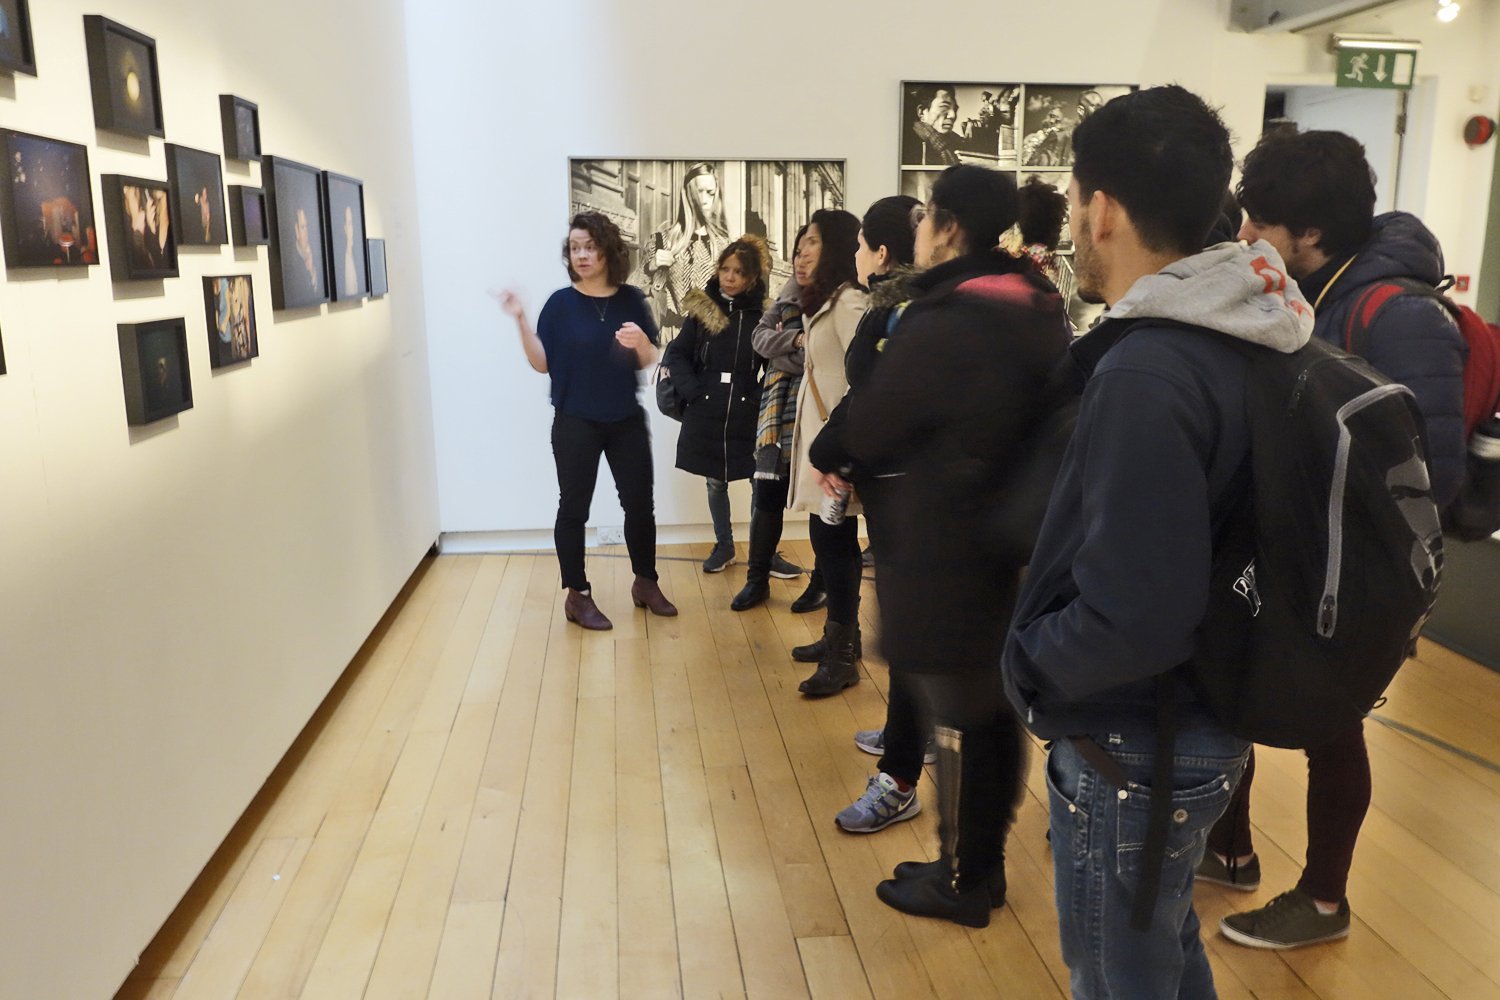  Niamh Crawley gives a tour of the exhibition 